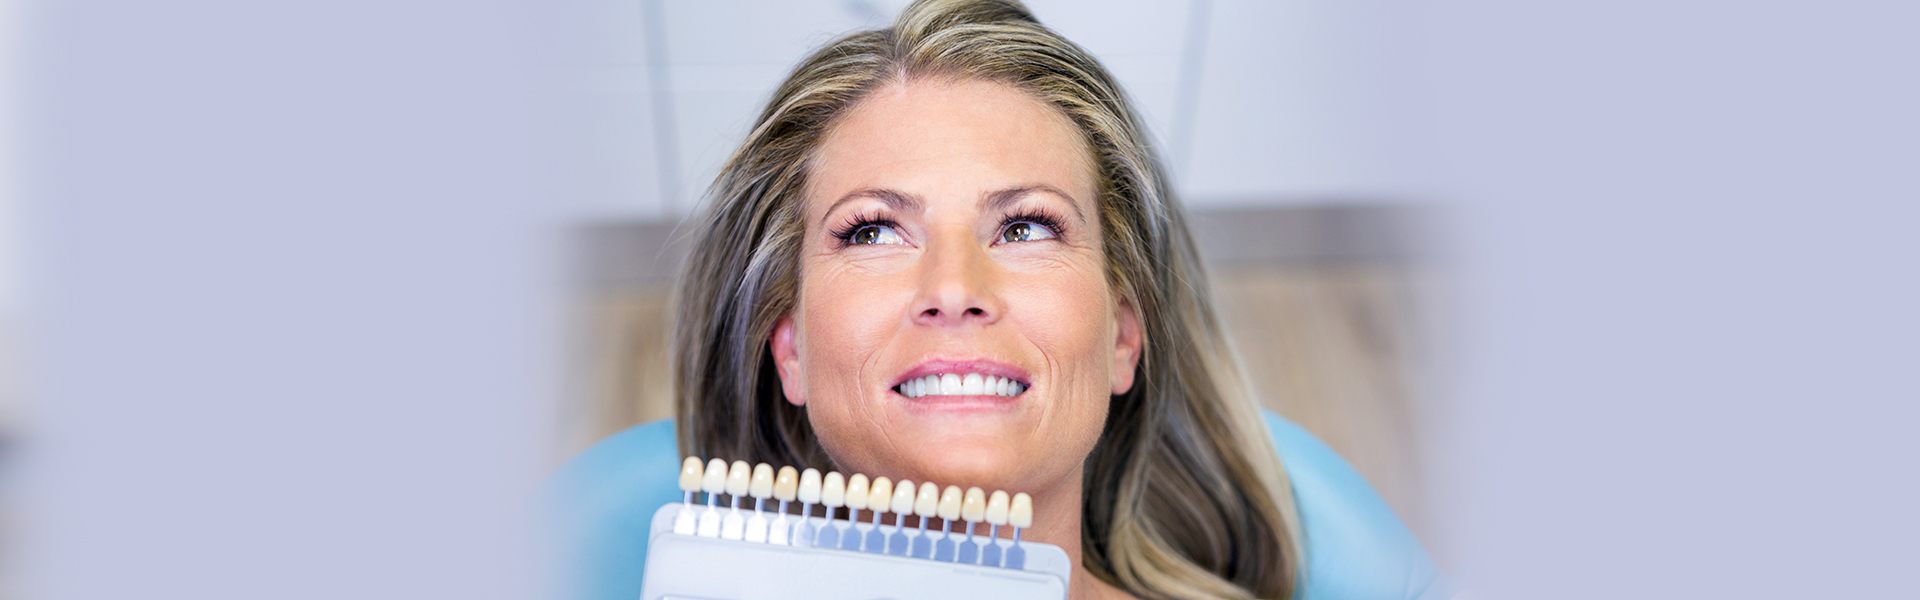 Dental Veneers – Your Solution to a Beautiful Smile